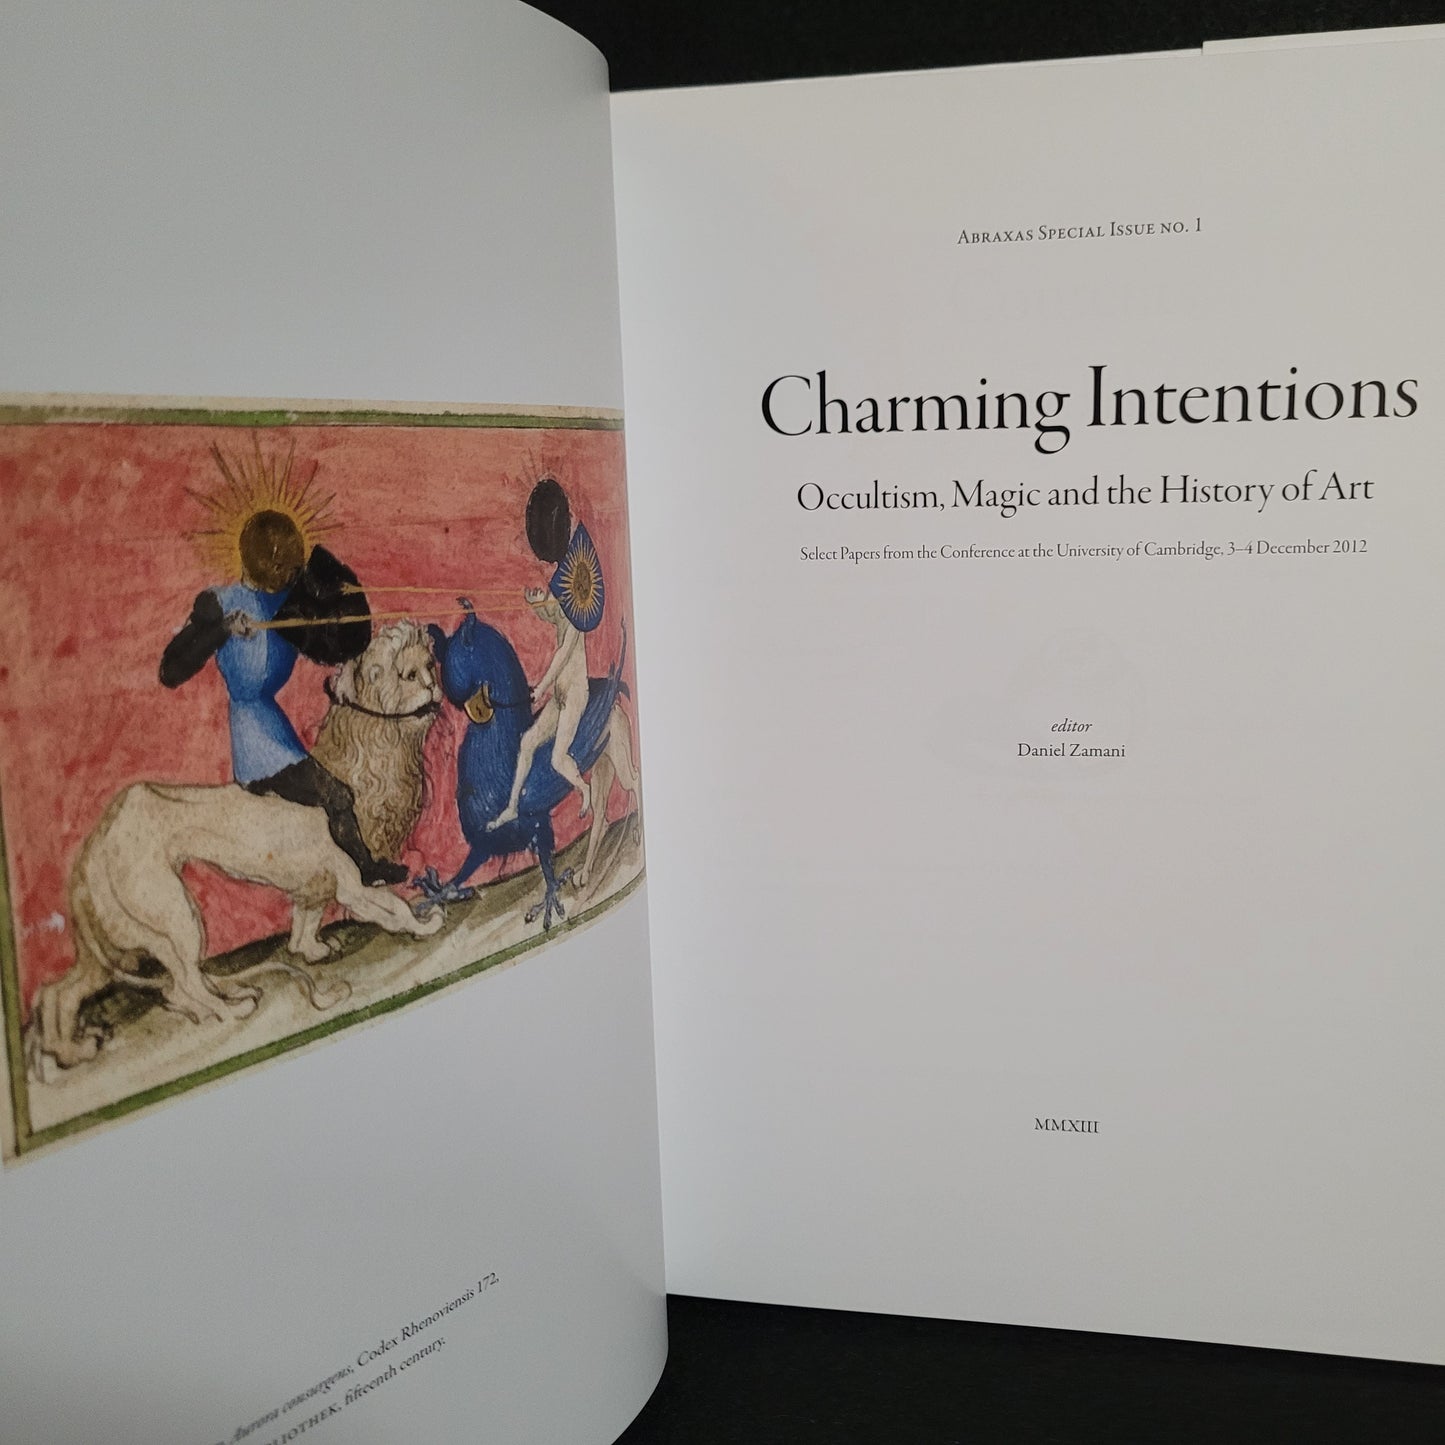 Abraxas International Journal of Esoteric Studies Special Issue No. 1: Charming Intentions: Occultism, Magic and the History of Art, Summer 2013 Edited by Daniel Zamani (Fulgur Esoterica, 2013) Hardcover Special Edition